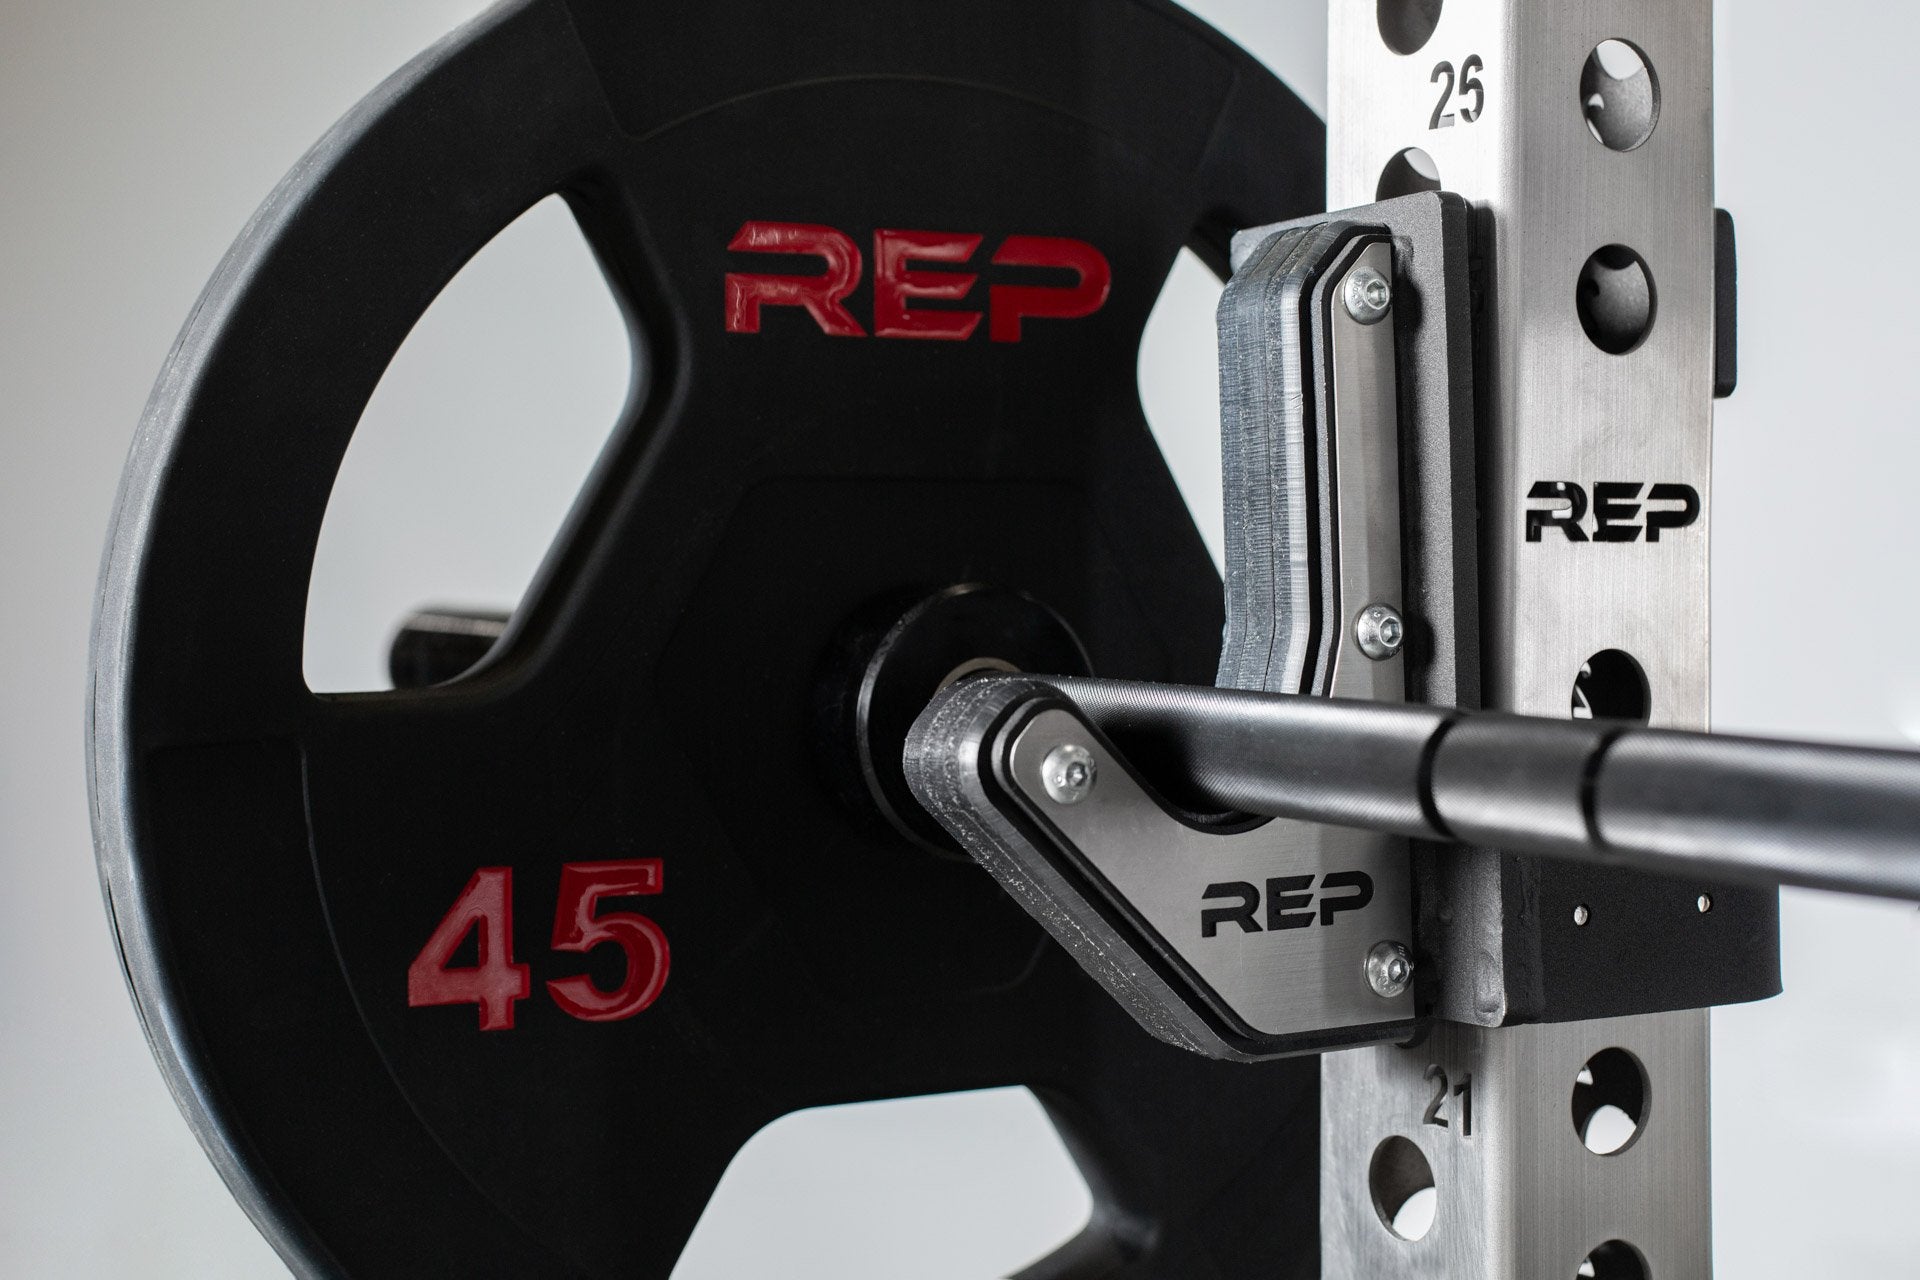 Close up view of a 45lb Rubber Coated Olympic Plate from the inside view of a barbell racked on flat sandwich j-cups on a PR-5000 power rack.